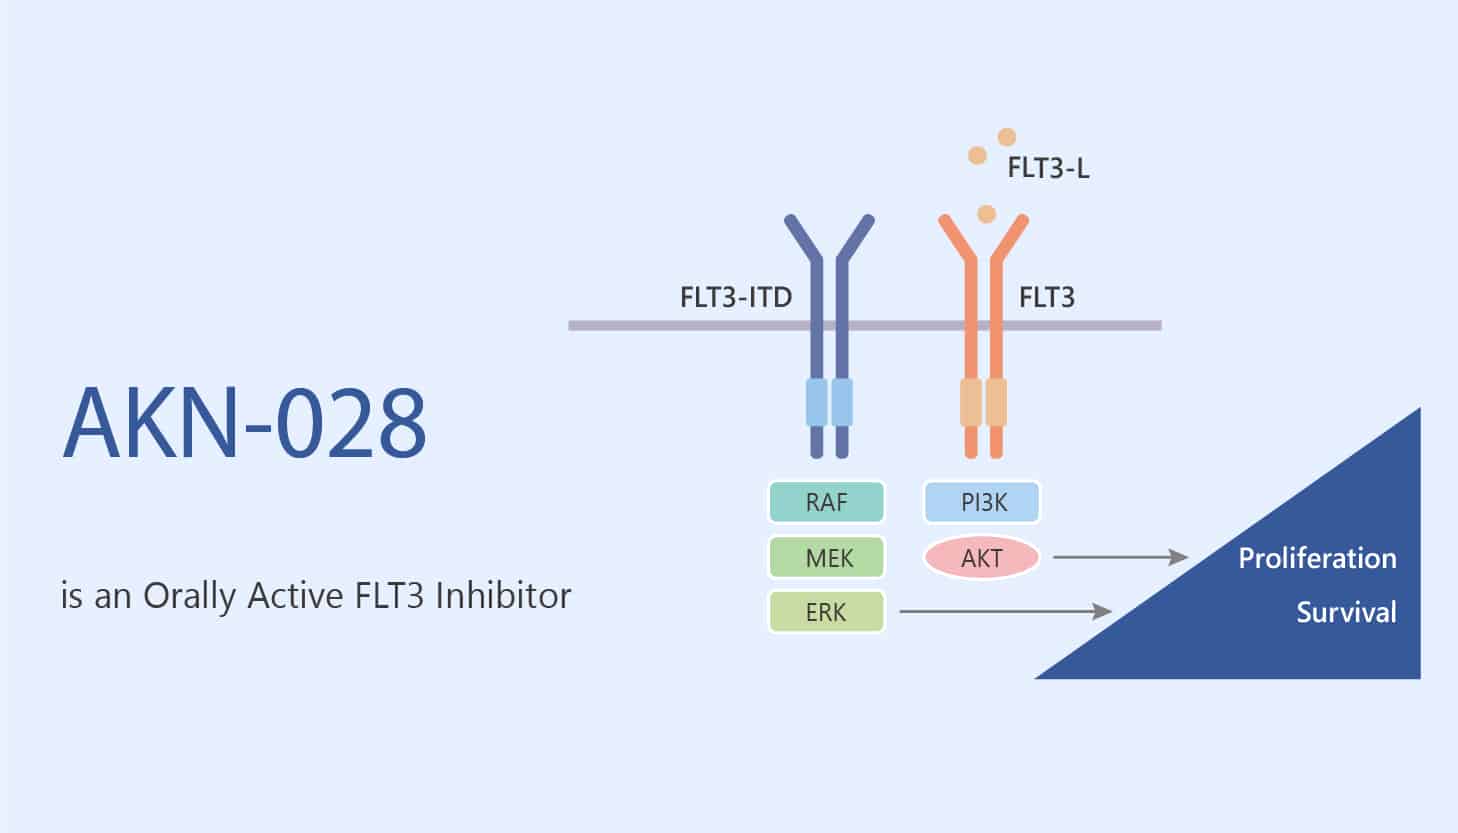 AKN-028 is an Orally Active FLT3 Inhibitor